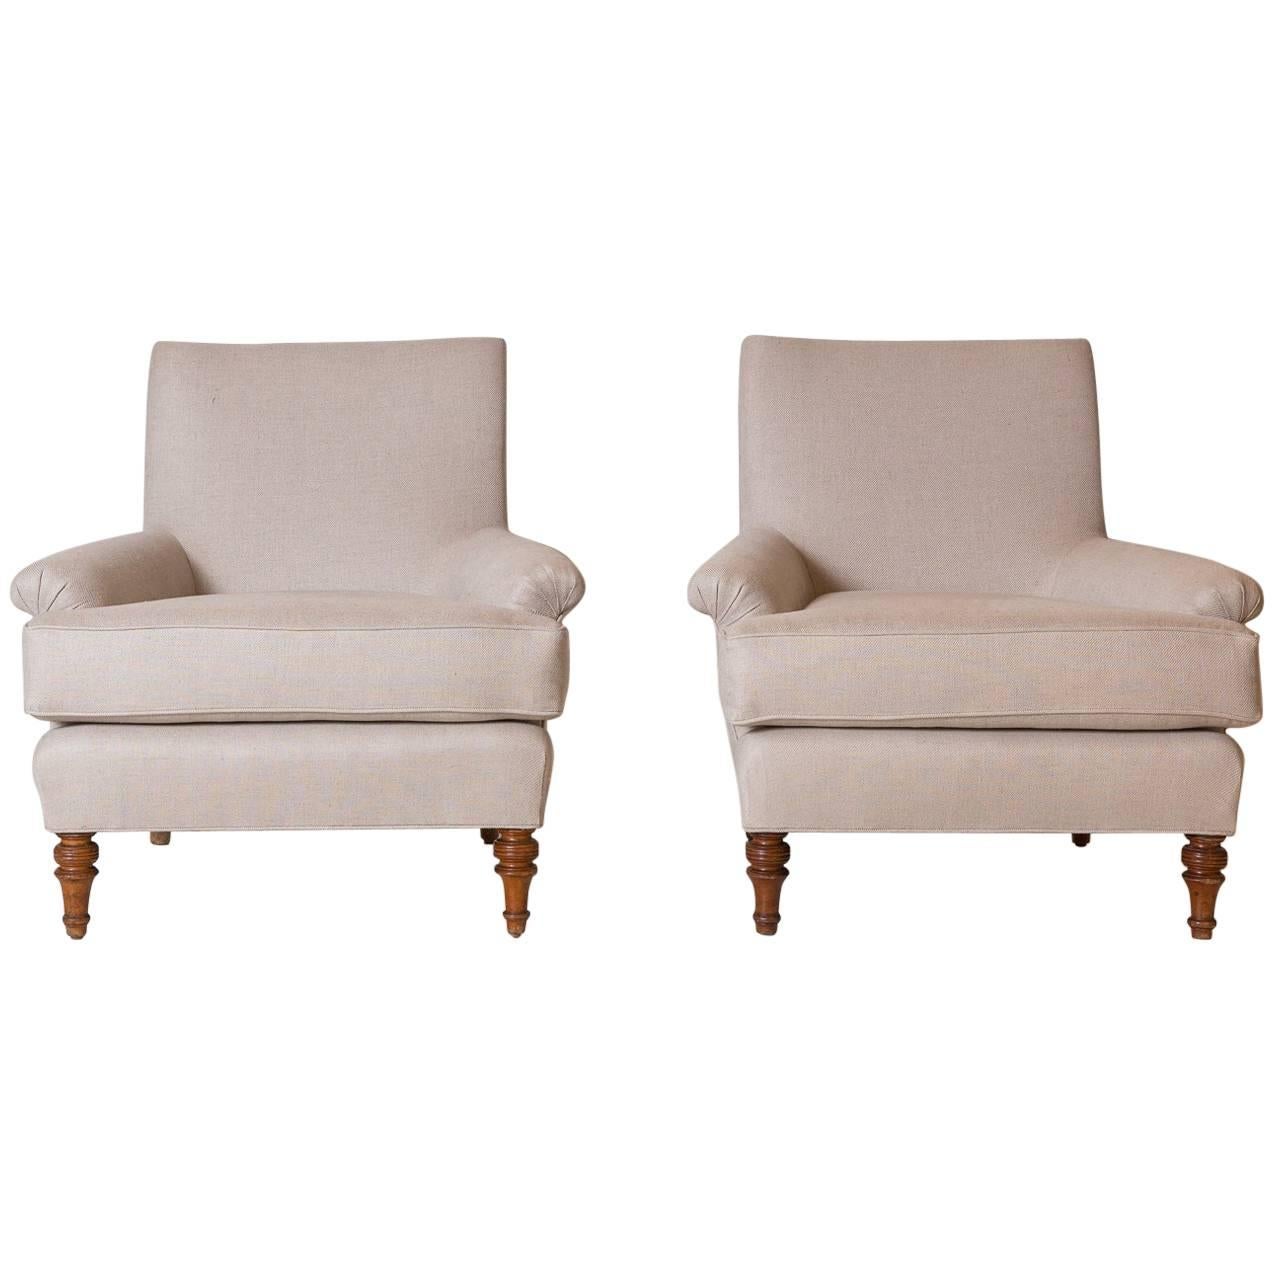 Pair of French Lounge Chairs Newly Upholstered in Natural Linen with Turned Legs